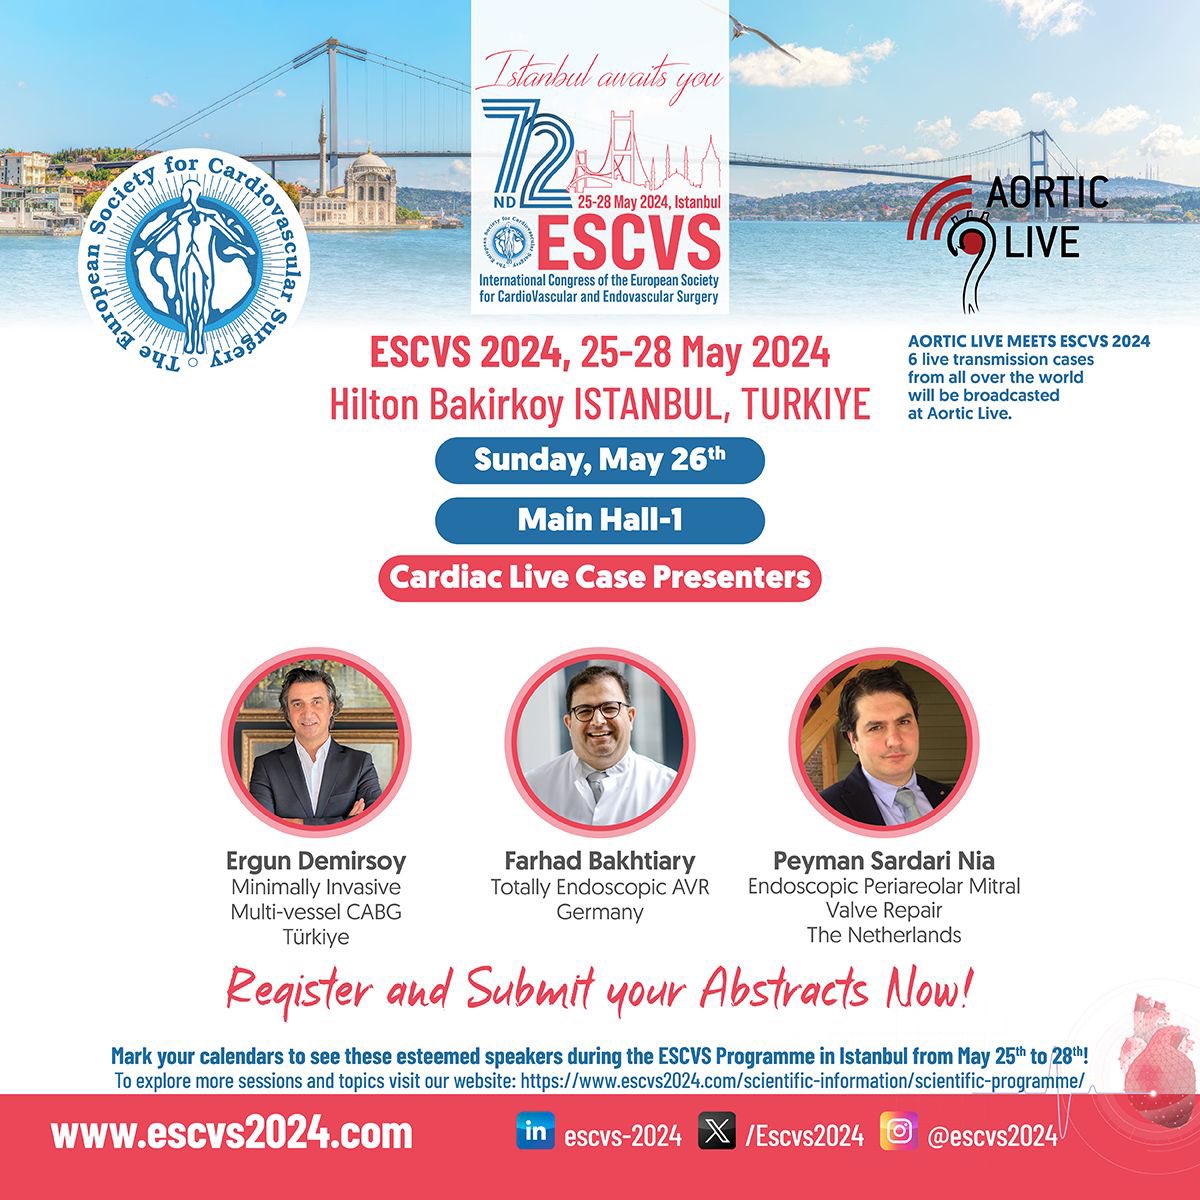 Thrilled to share our #heartteam will perform live #endoscopic #mitralvalverepair at ESCVS 2024! 🎥 Also featuring #minimallyinvasive CABG by Ergun Demirsoy’s team & endoscopic AVR by Farhad Bakhtiary’s team. Full details & registration on the ESCVS website! #cardiacsurgery